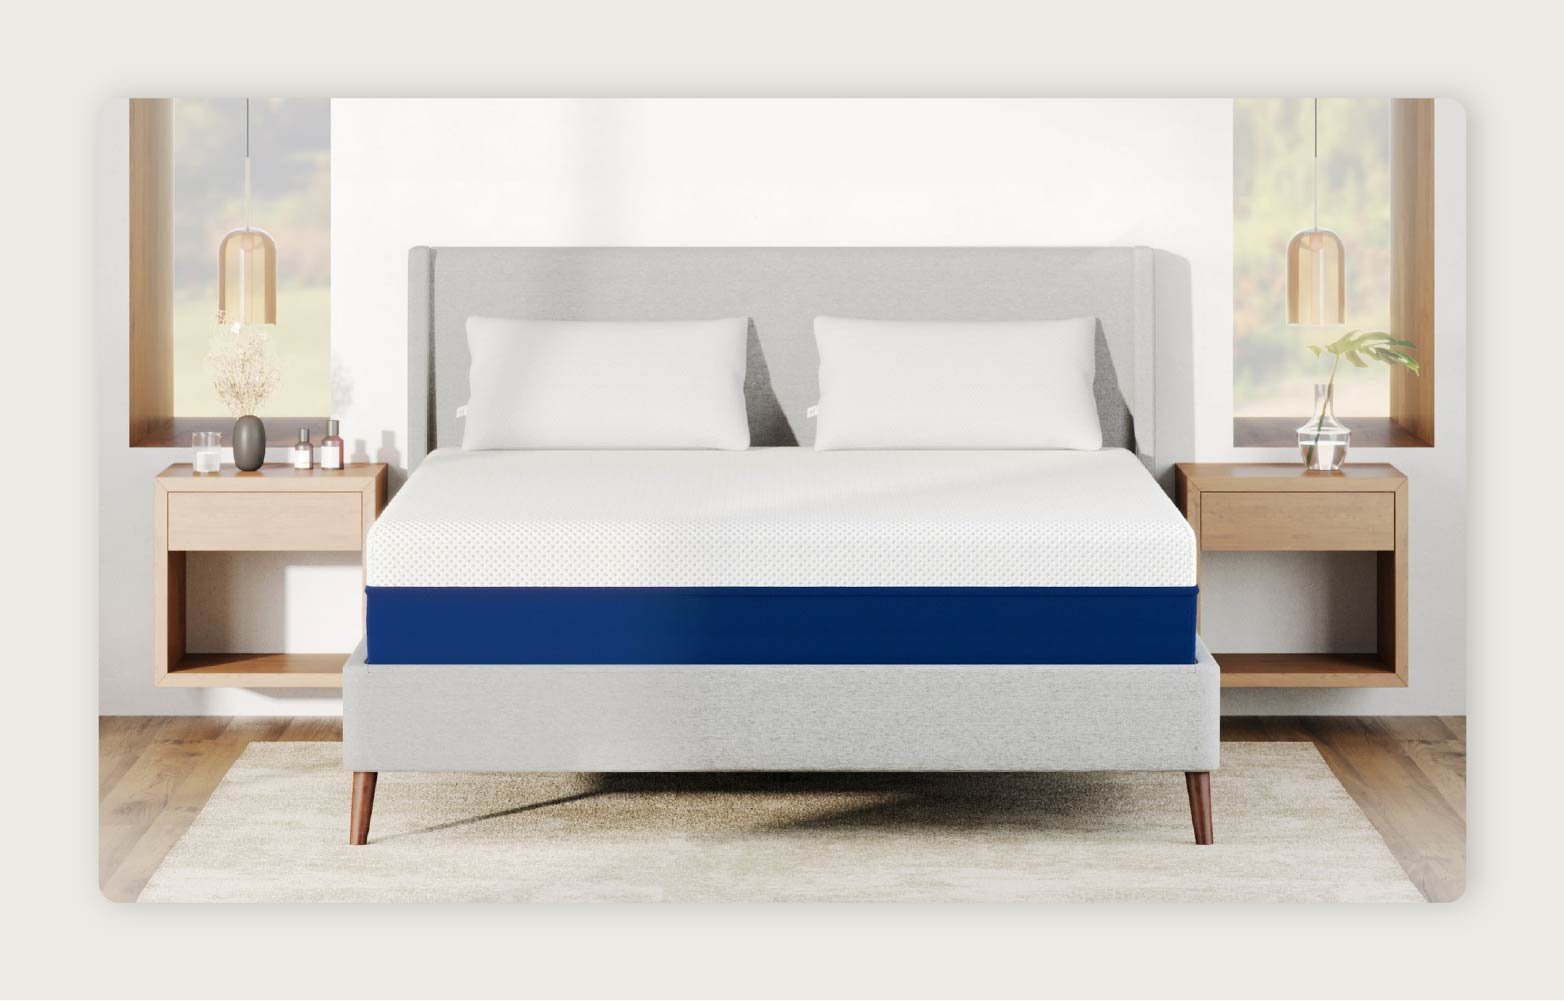 The Amerisleep AS2 Mattress in a modern room with a wooden table on each side. 